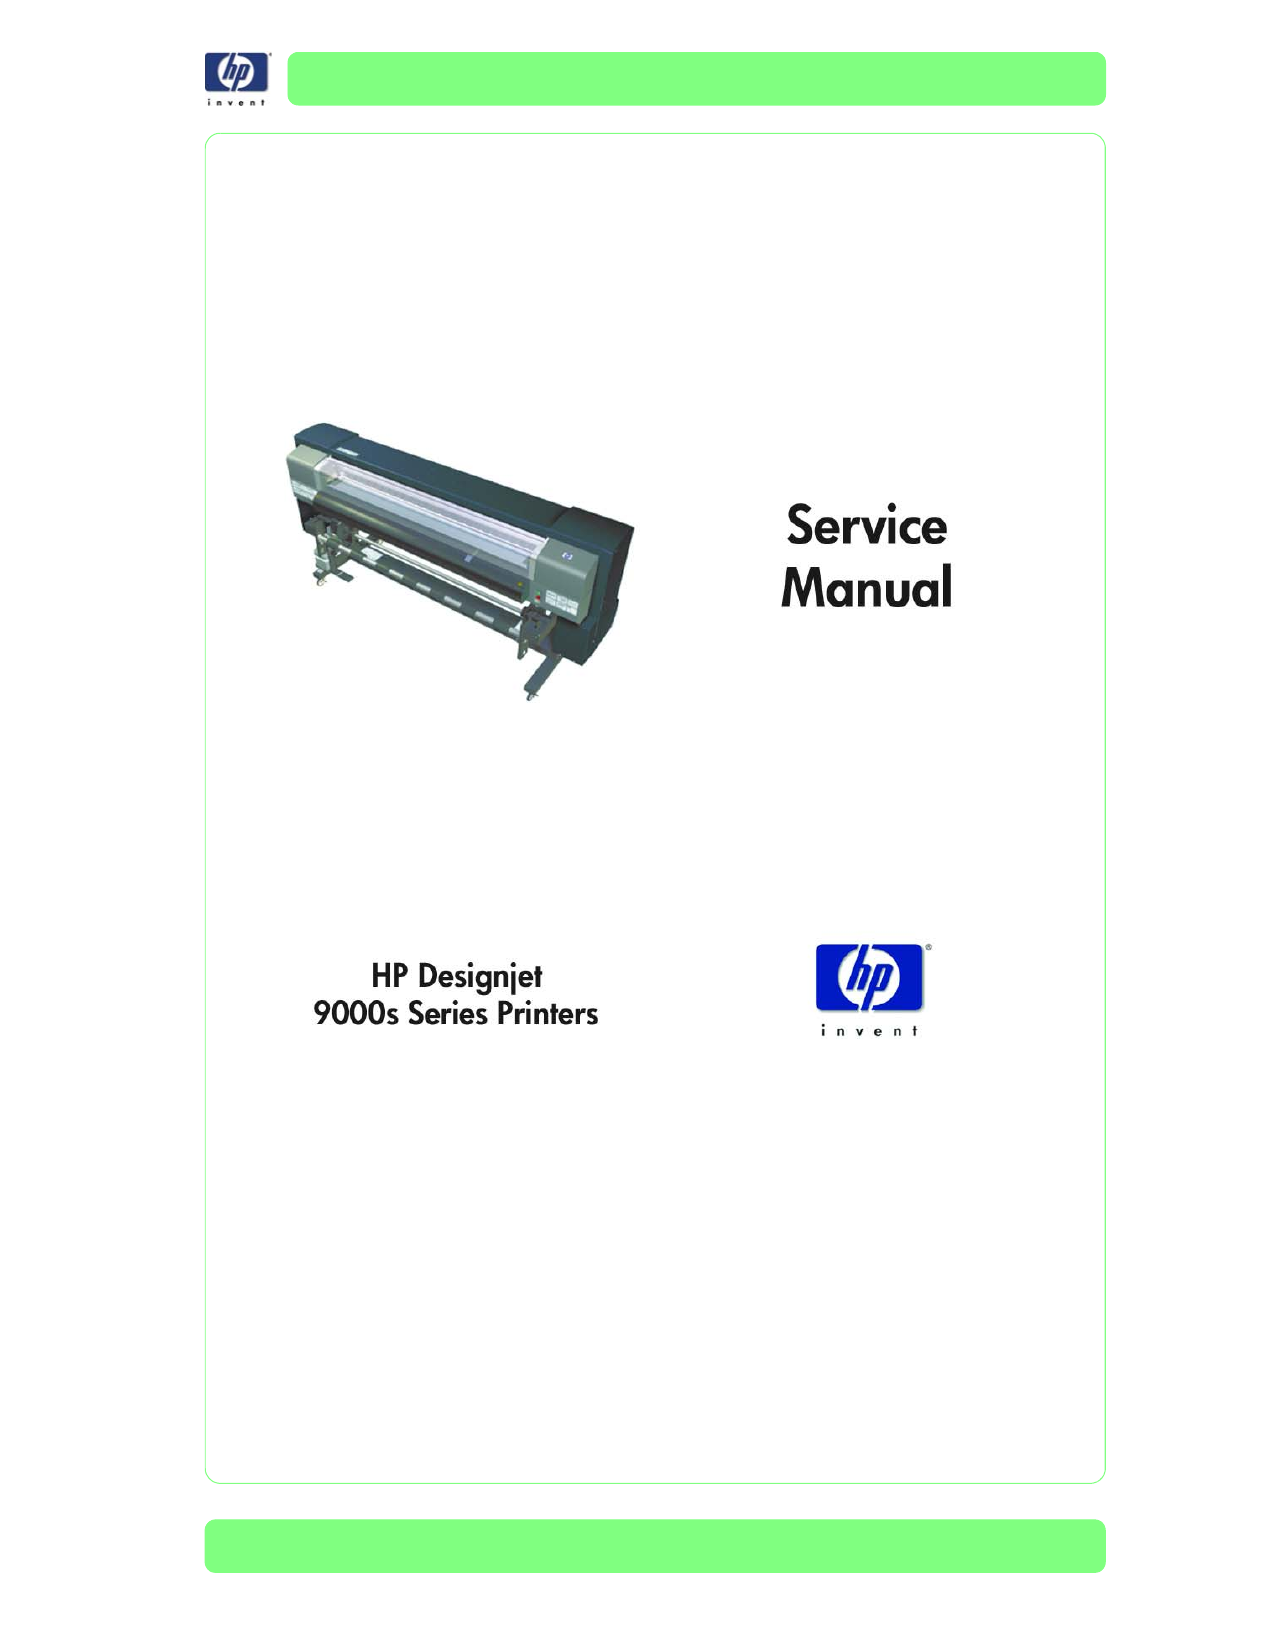 HP Designjet 9000S service guide Preview image 3